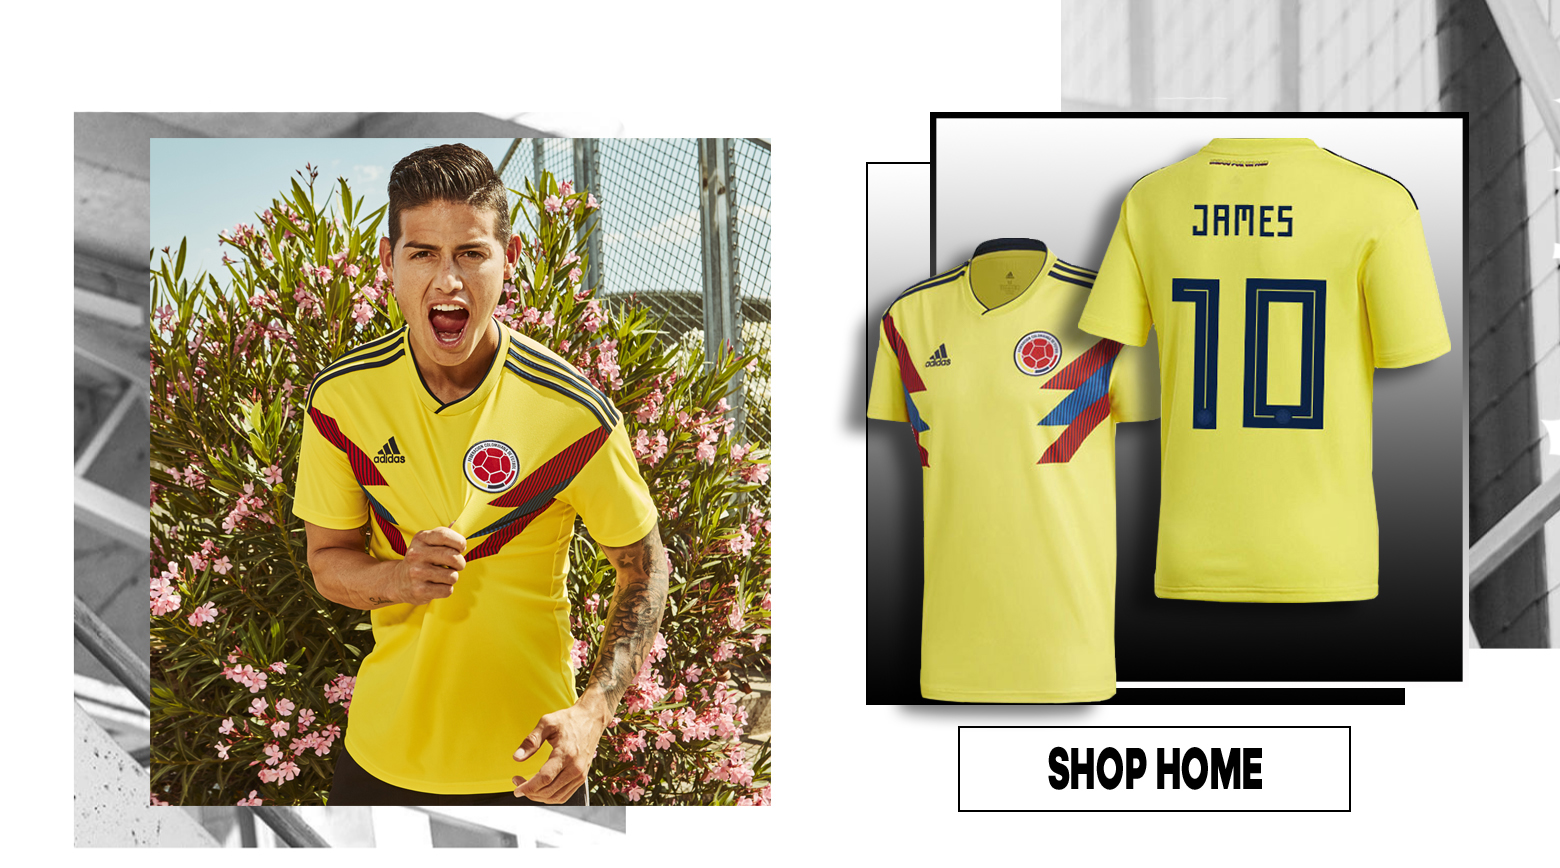 james colombia jersey